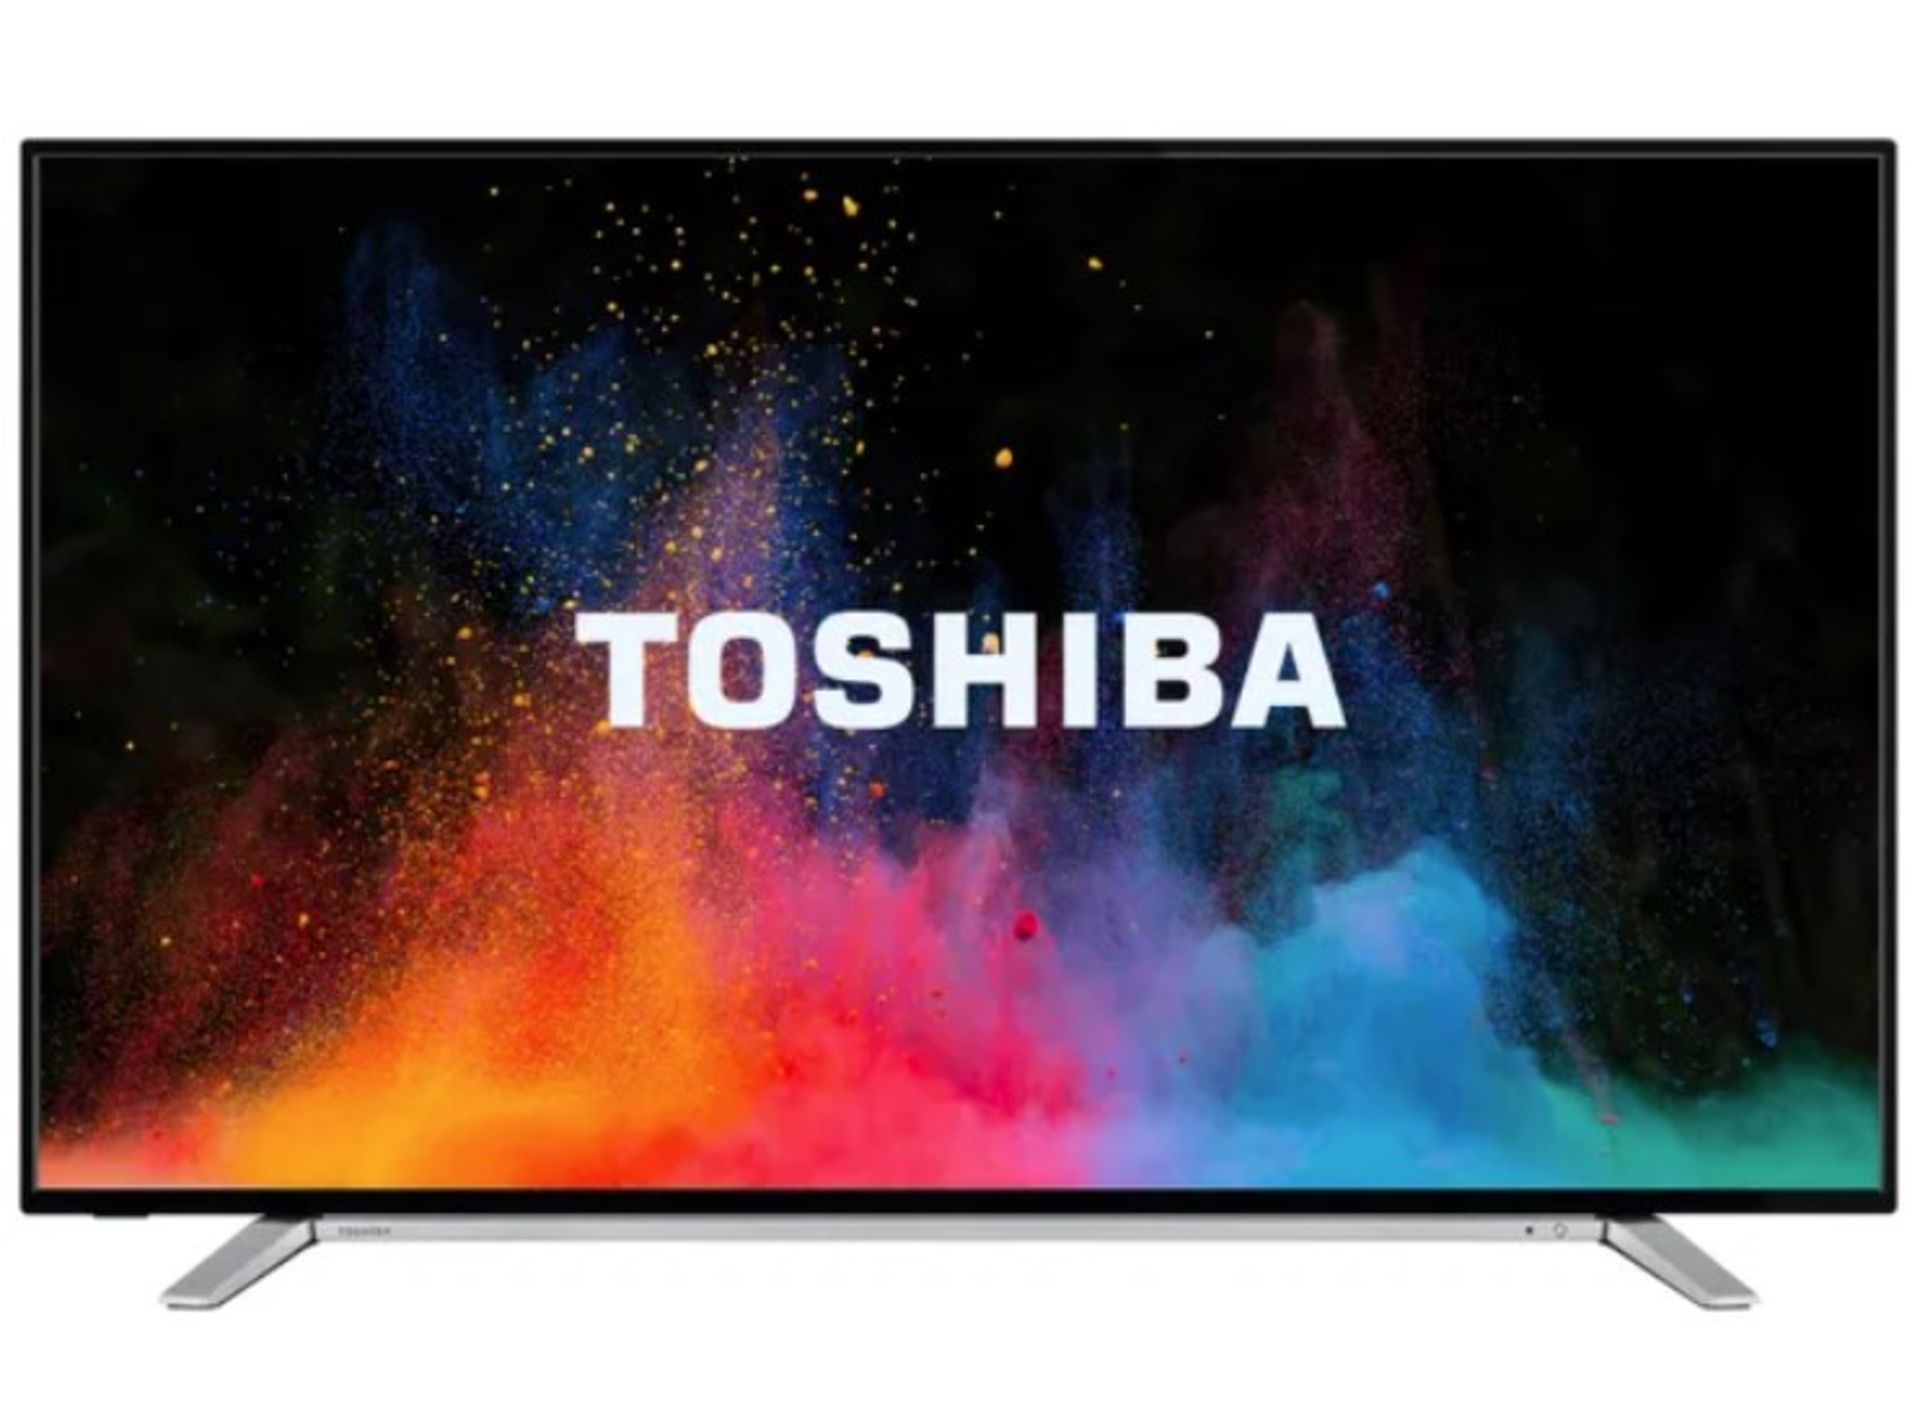 1 BOXED TOSHIBA 43UA2B63DB 43" SMART 4K ULTRA HD HDR LED TV WITH STAND AND REMOTE RRP Â£249 (